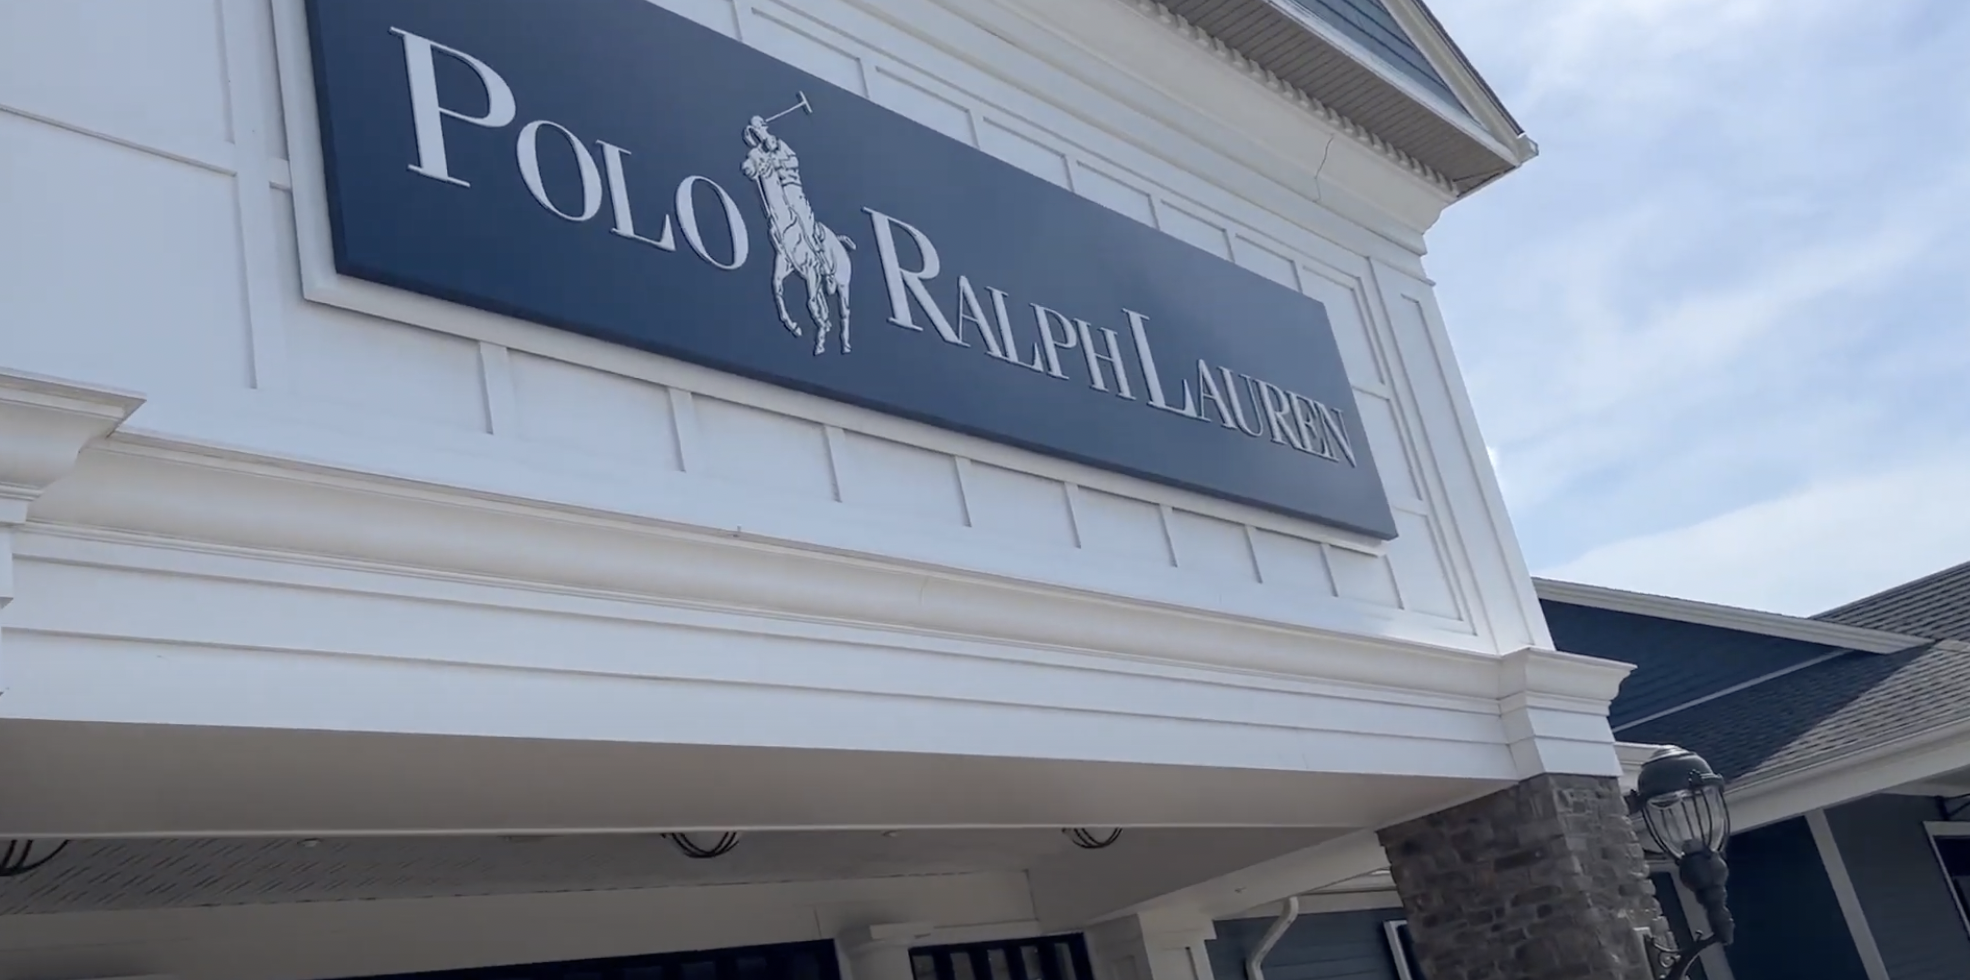 polo ralph lauren return policy-store-shopping-clothing